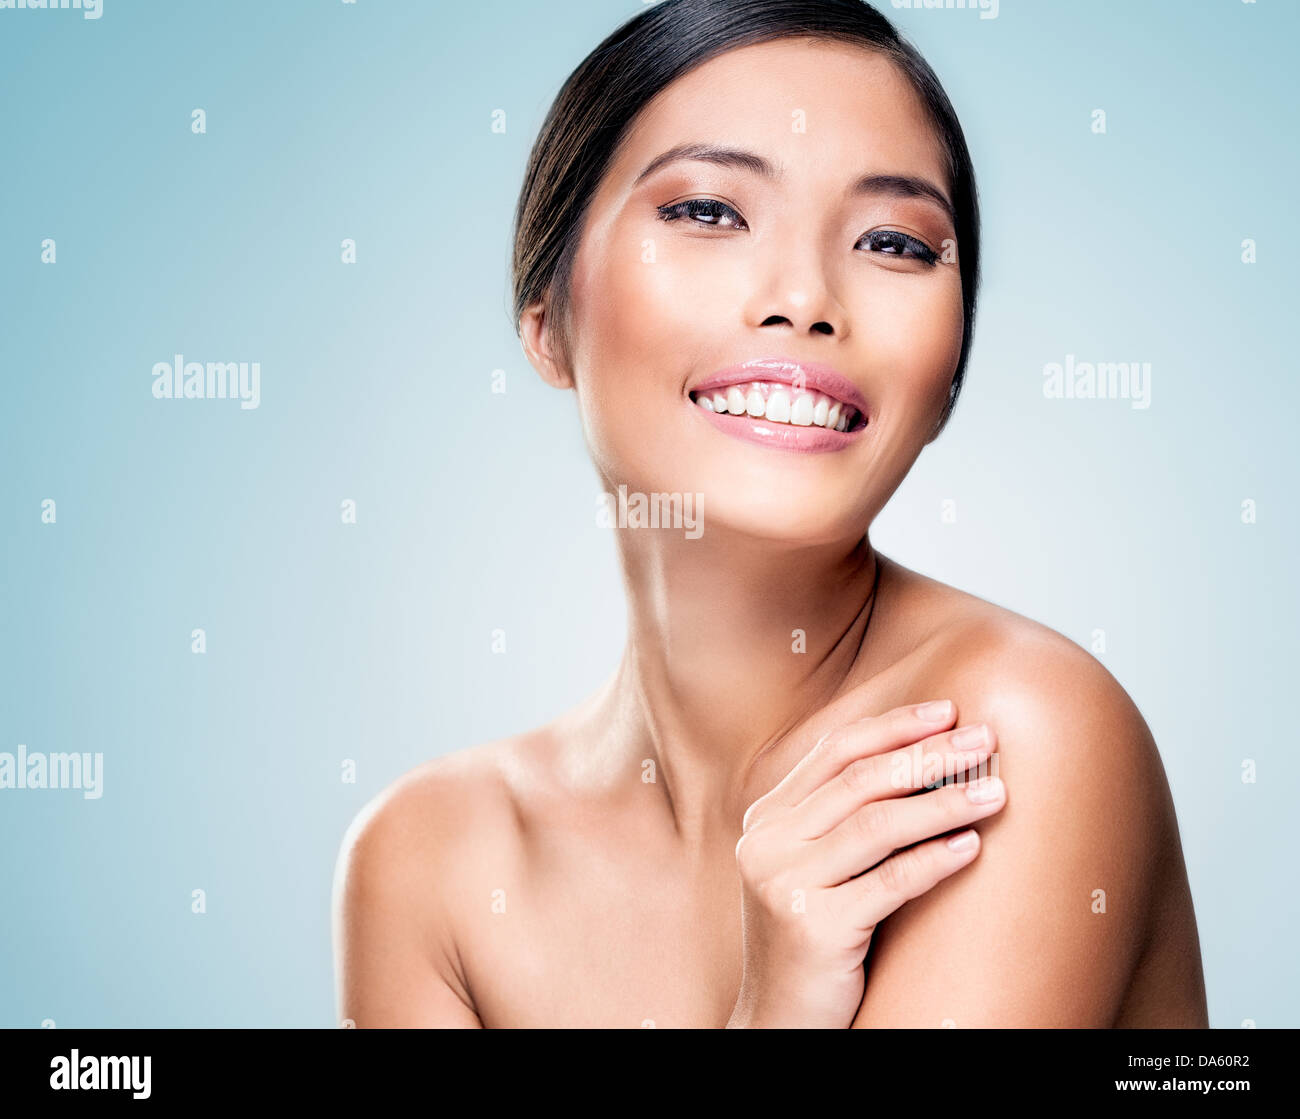 A beautiful Asian model posing and smiling. Stock Photo